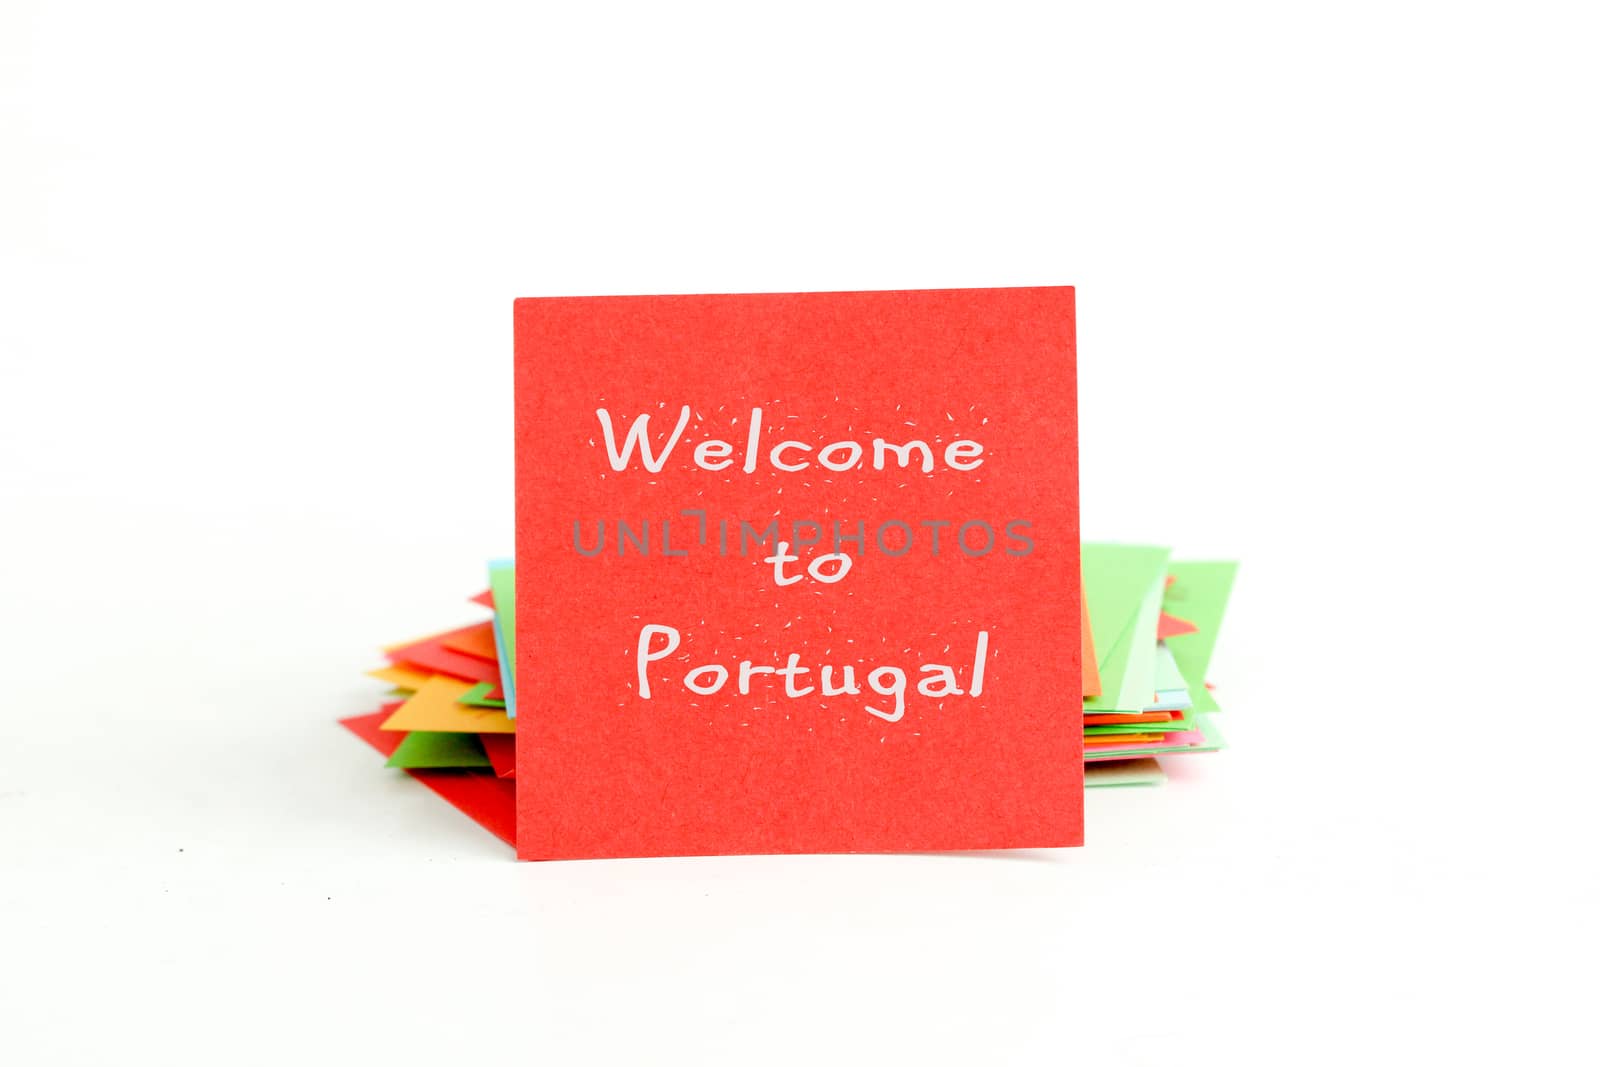 picture of a red note paper with text welcome to portugal